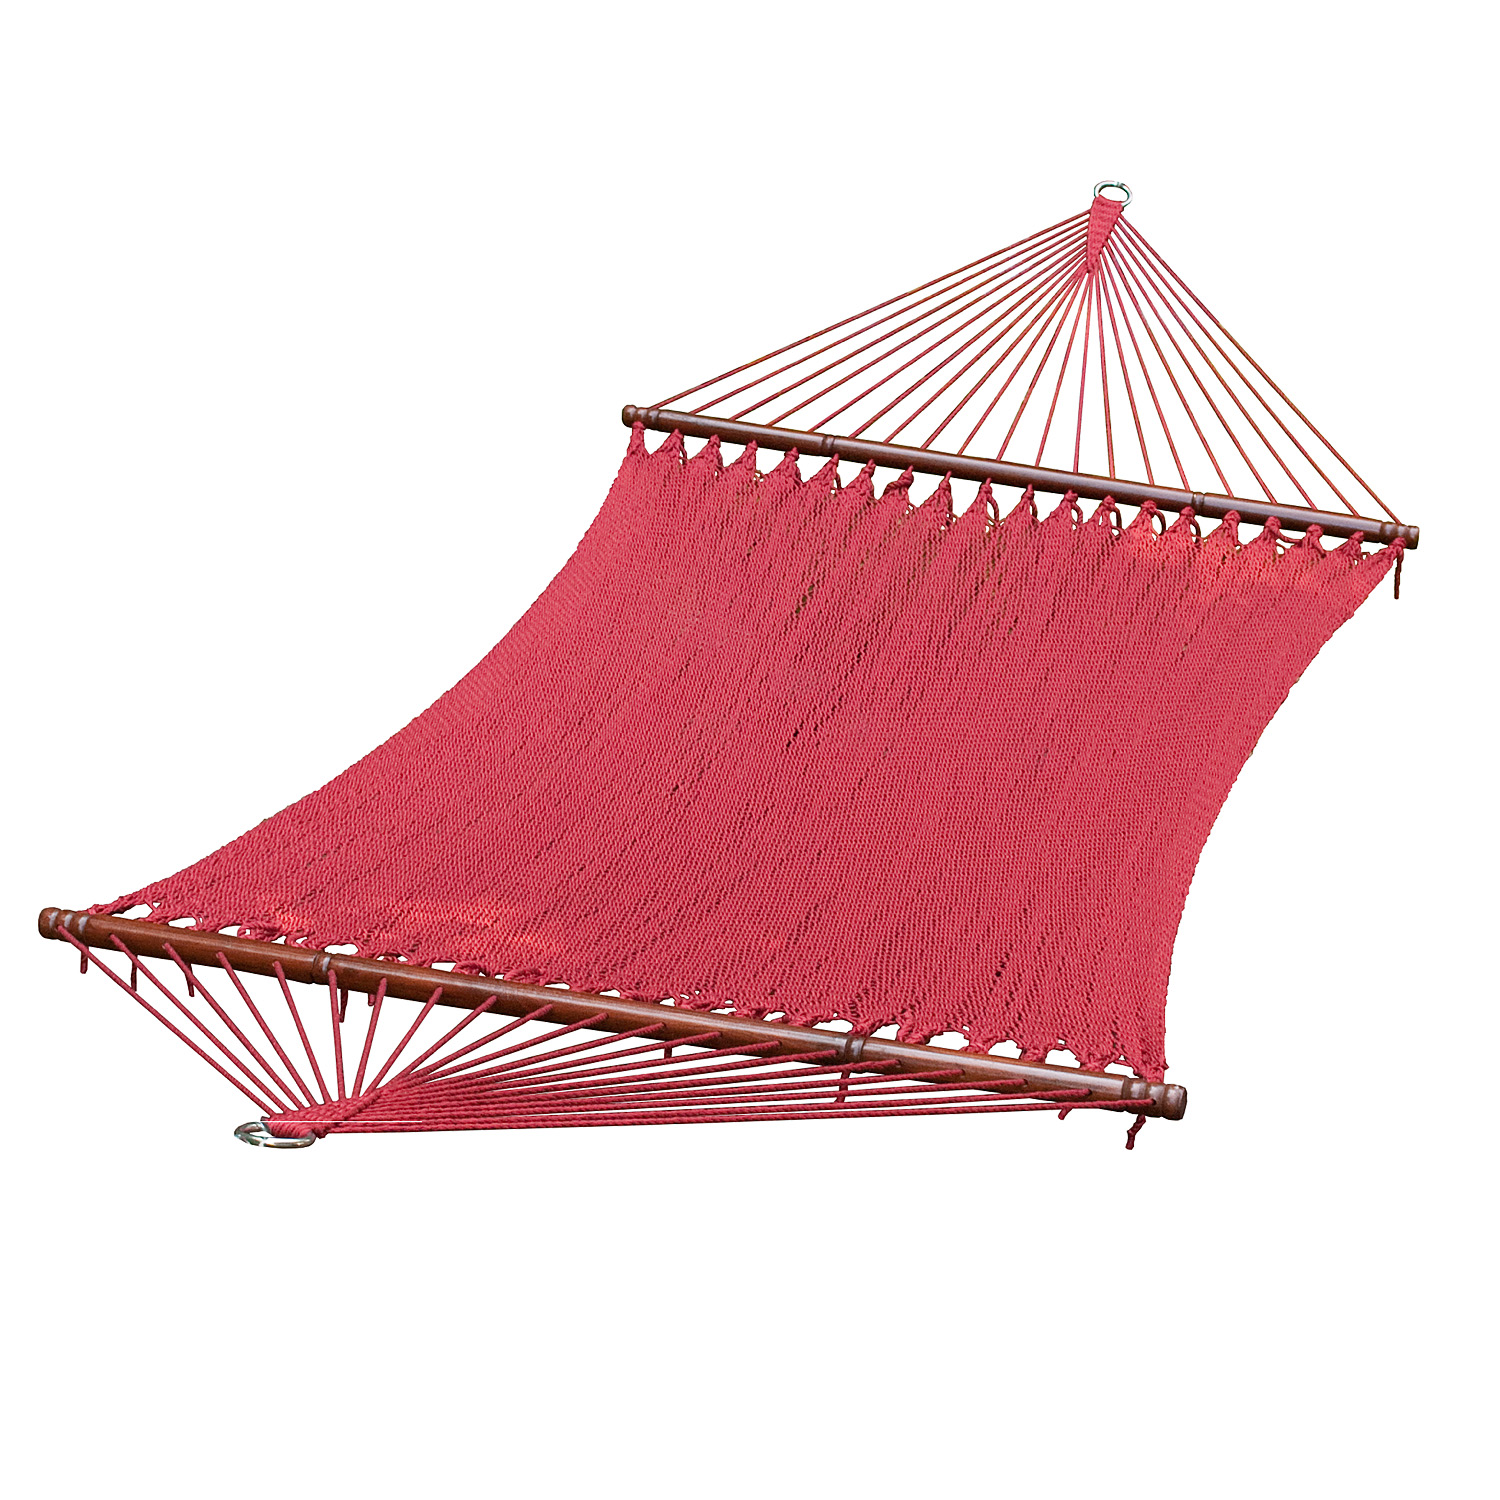 13 ft. 2-Point Tight Weave Soft Polyester Caribbean Rope Hammock, Burgundy